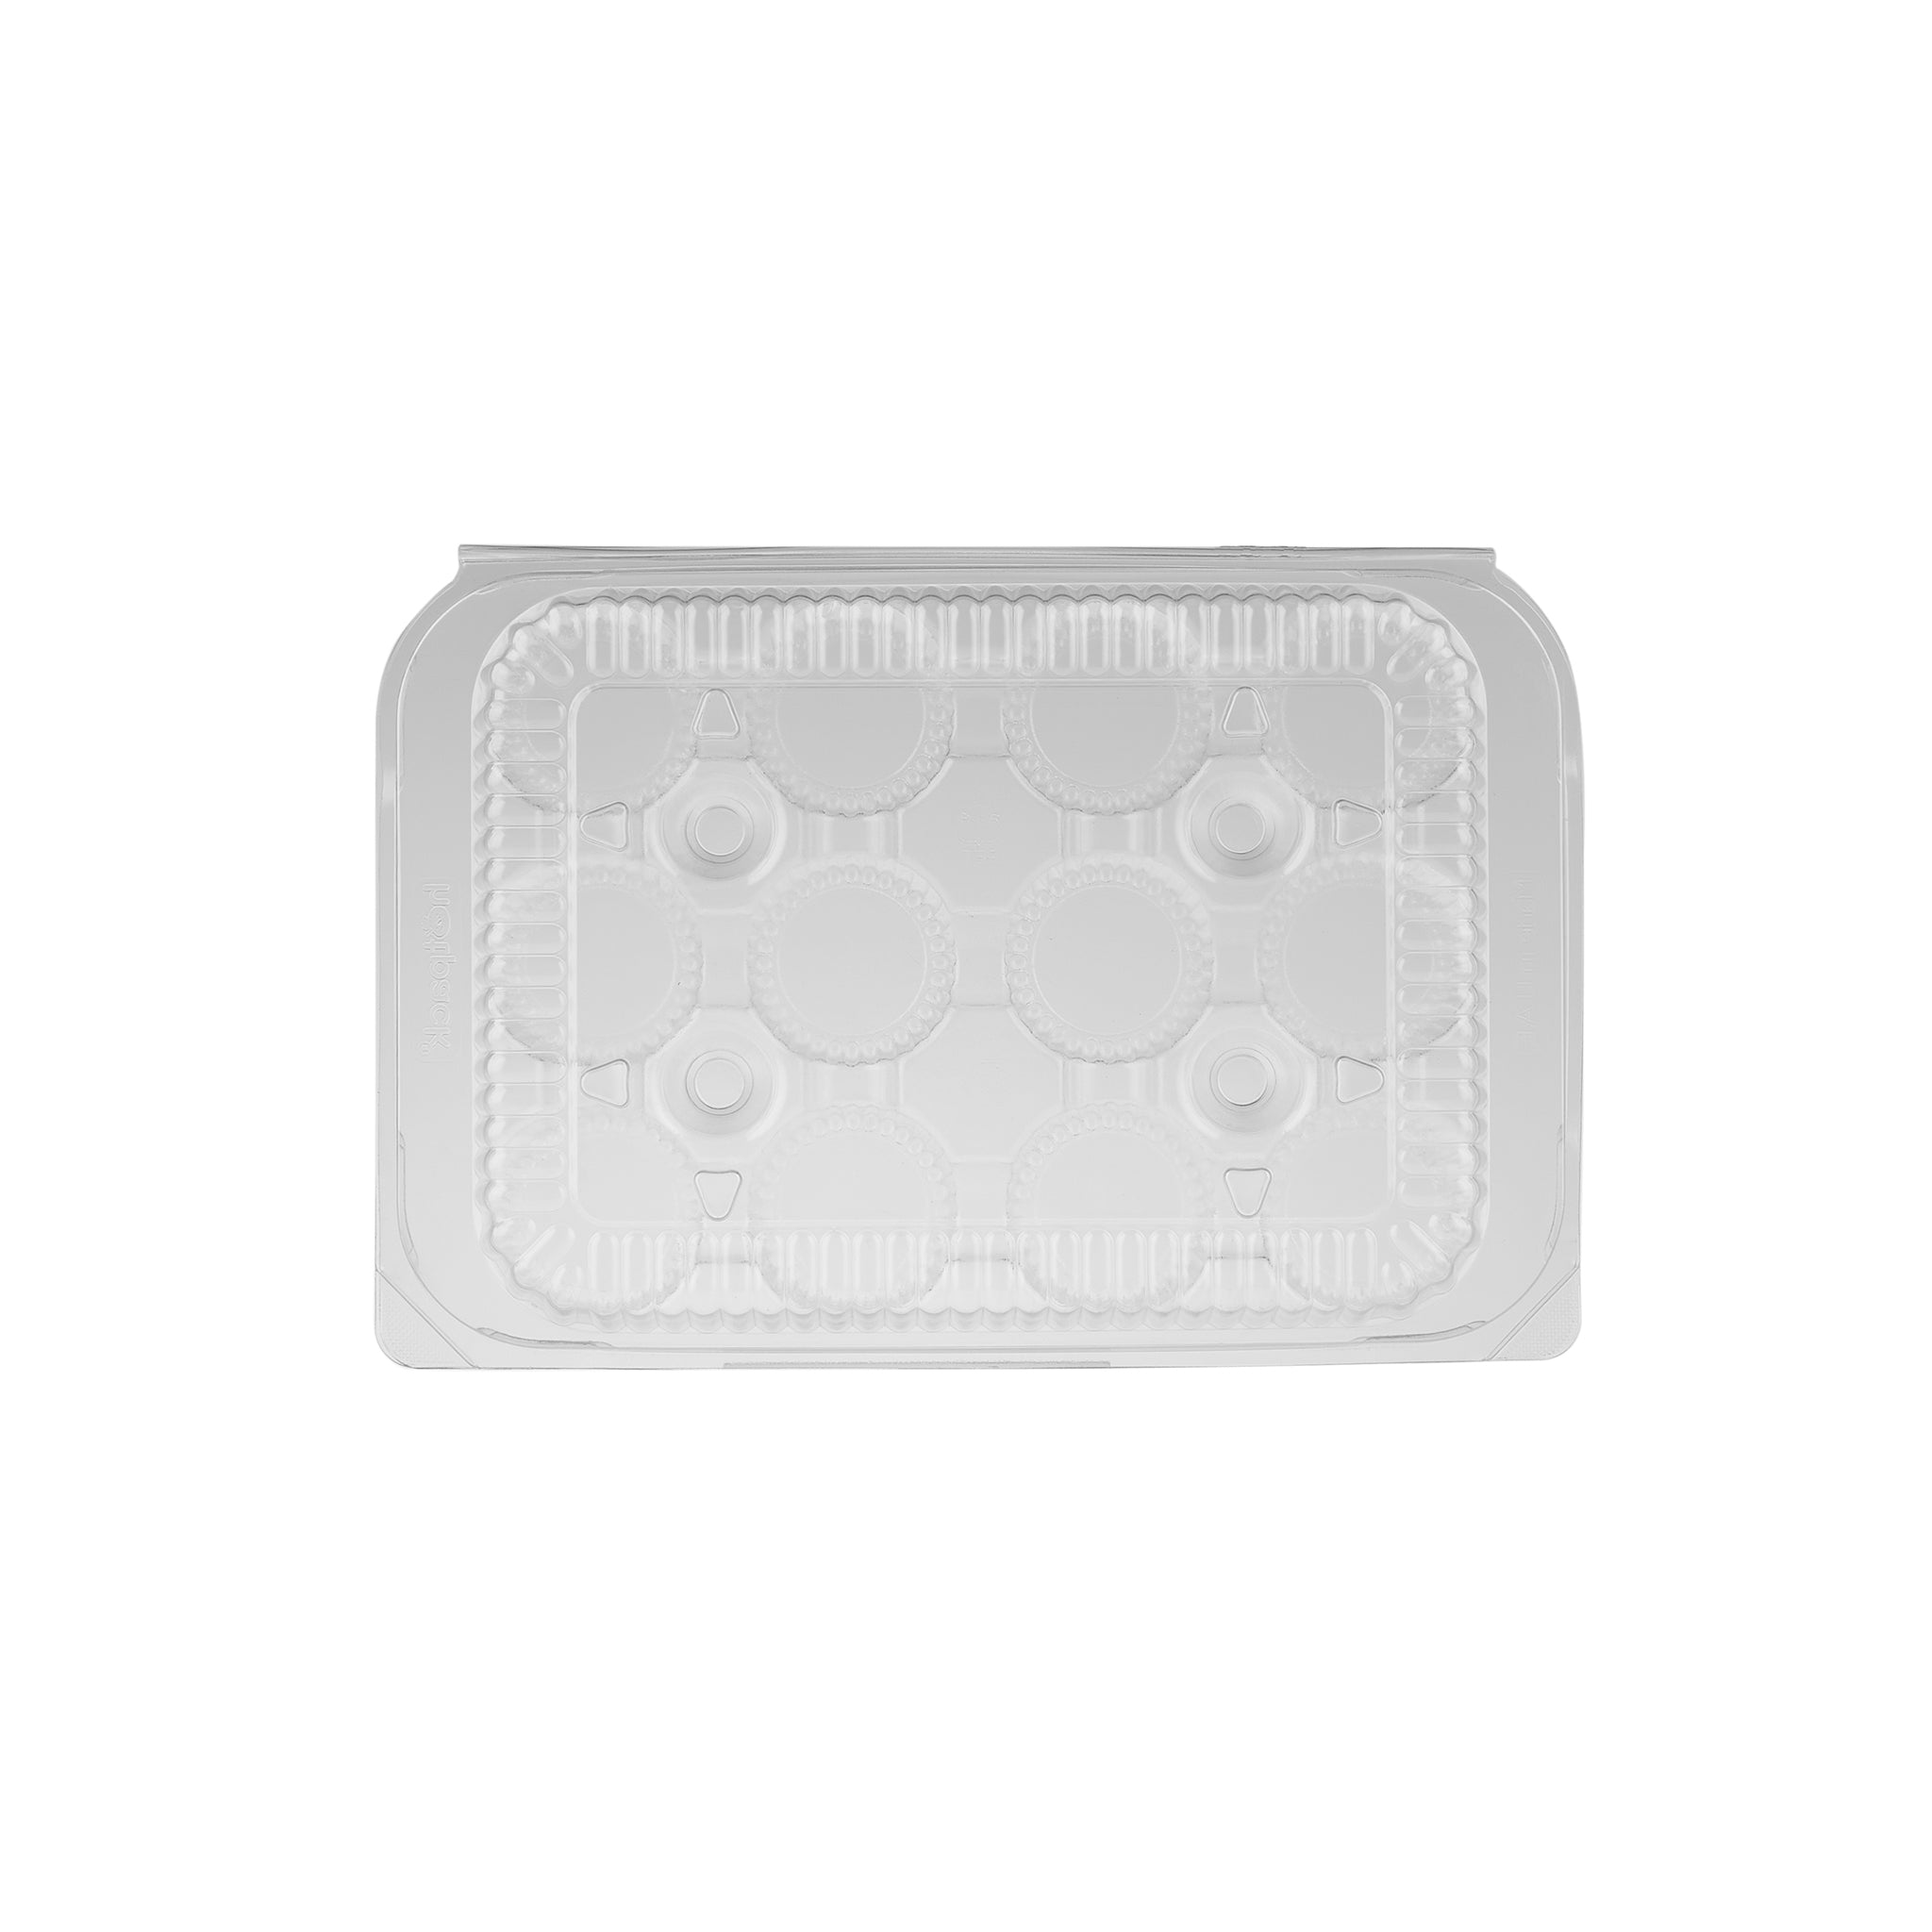 Clear PET Muffin/ Cupcake Tray 250 Pieces - hotpackwebstore.com